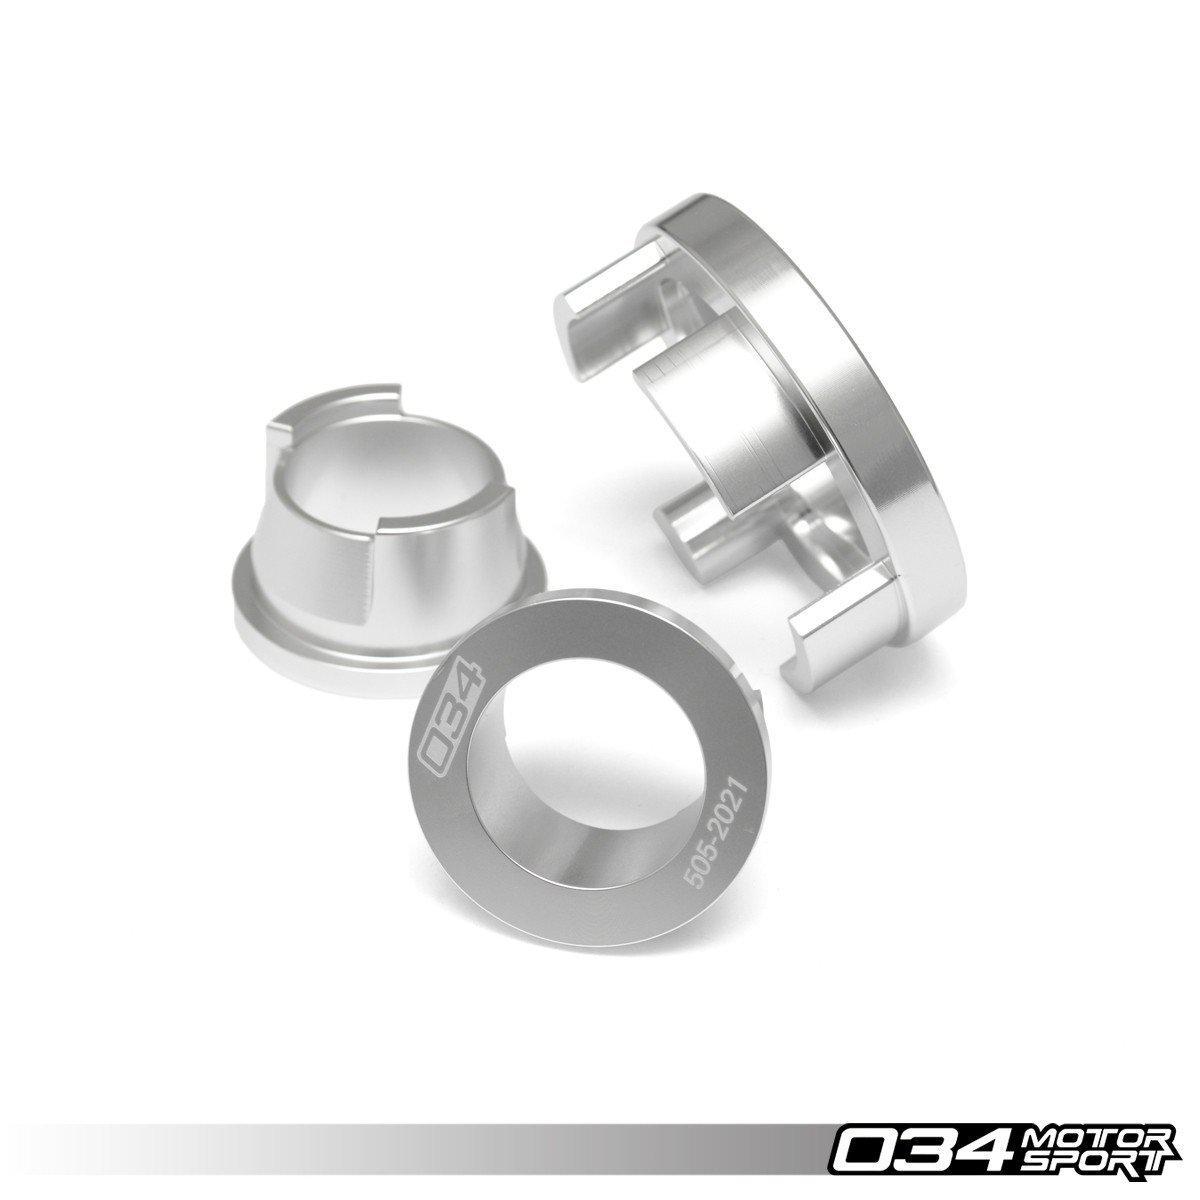 Billet Aluminum Rear Differential Mount Insert Kit, B9 Audi A4/S4/S5/RS5 & Allroad-A Little Tuning Co